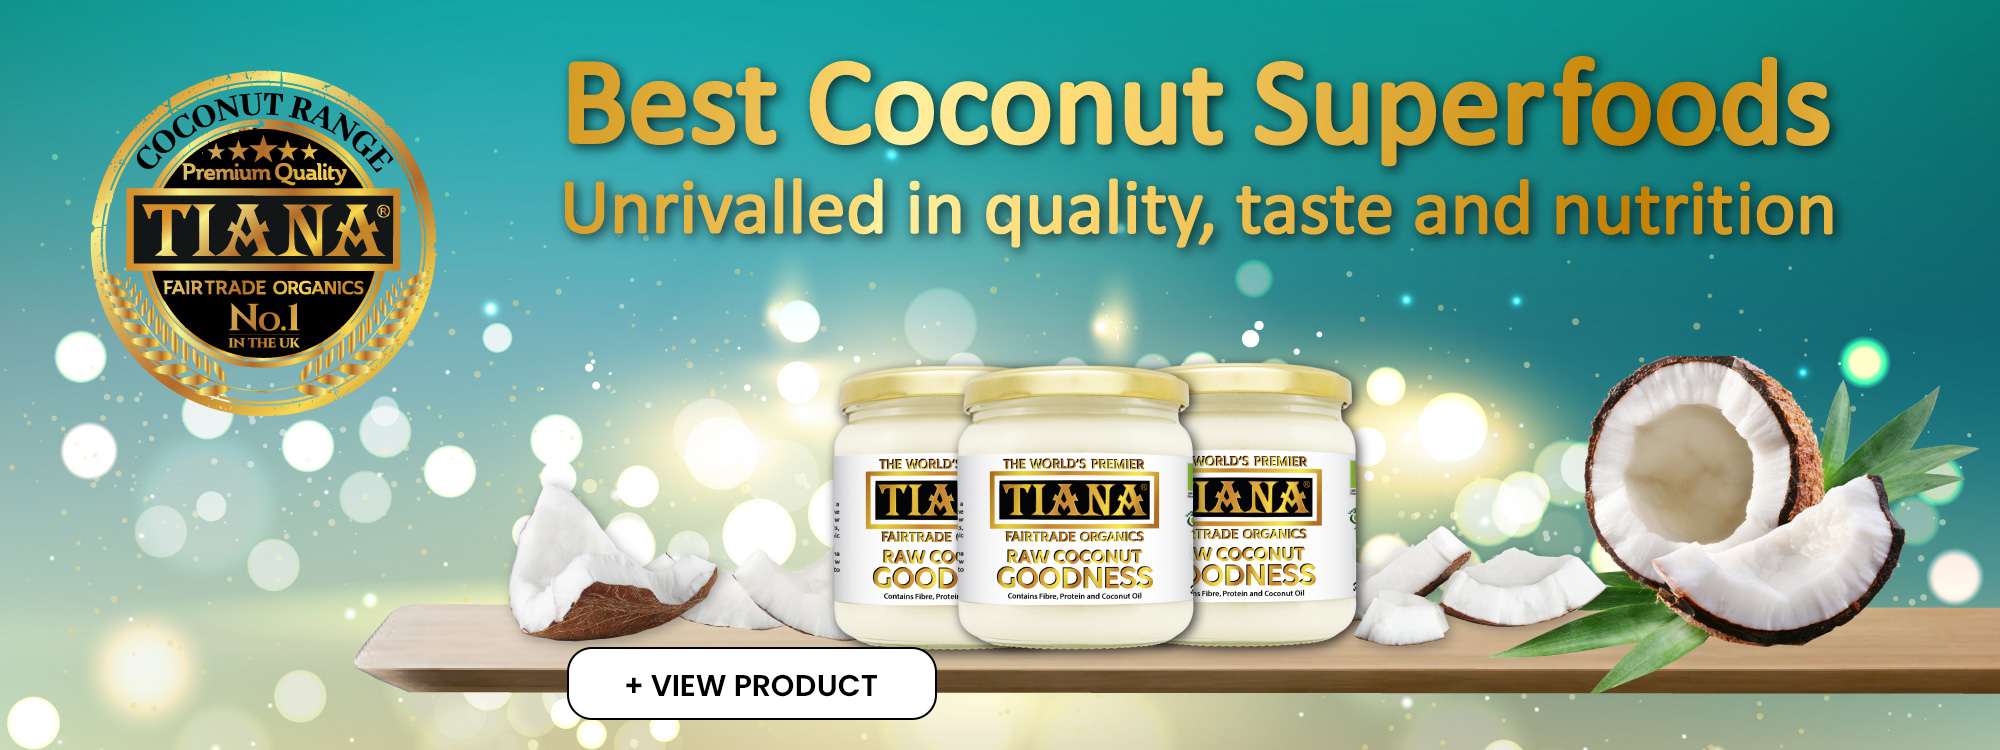 Coconut Superfoods